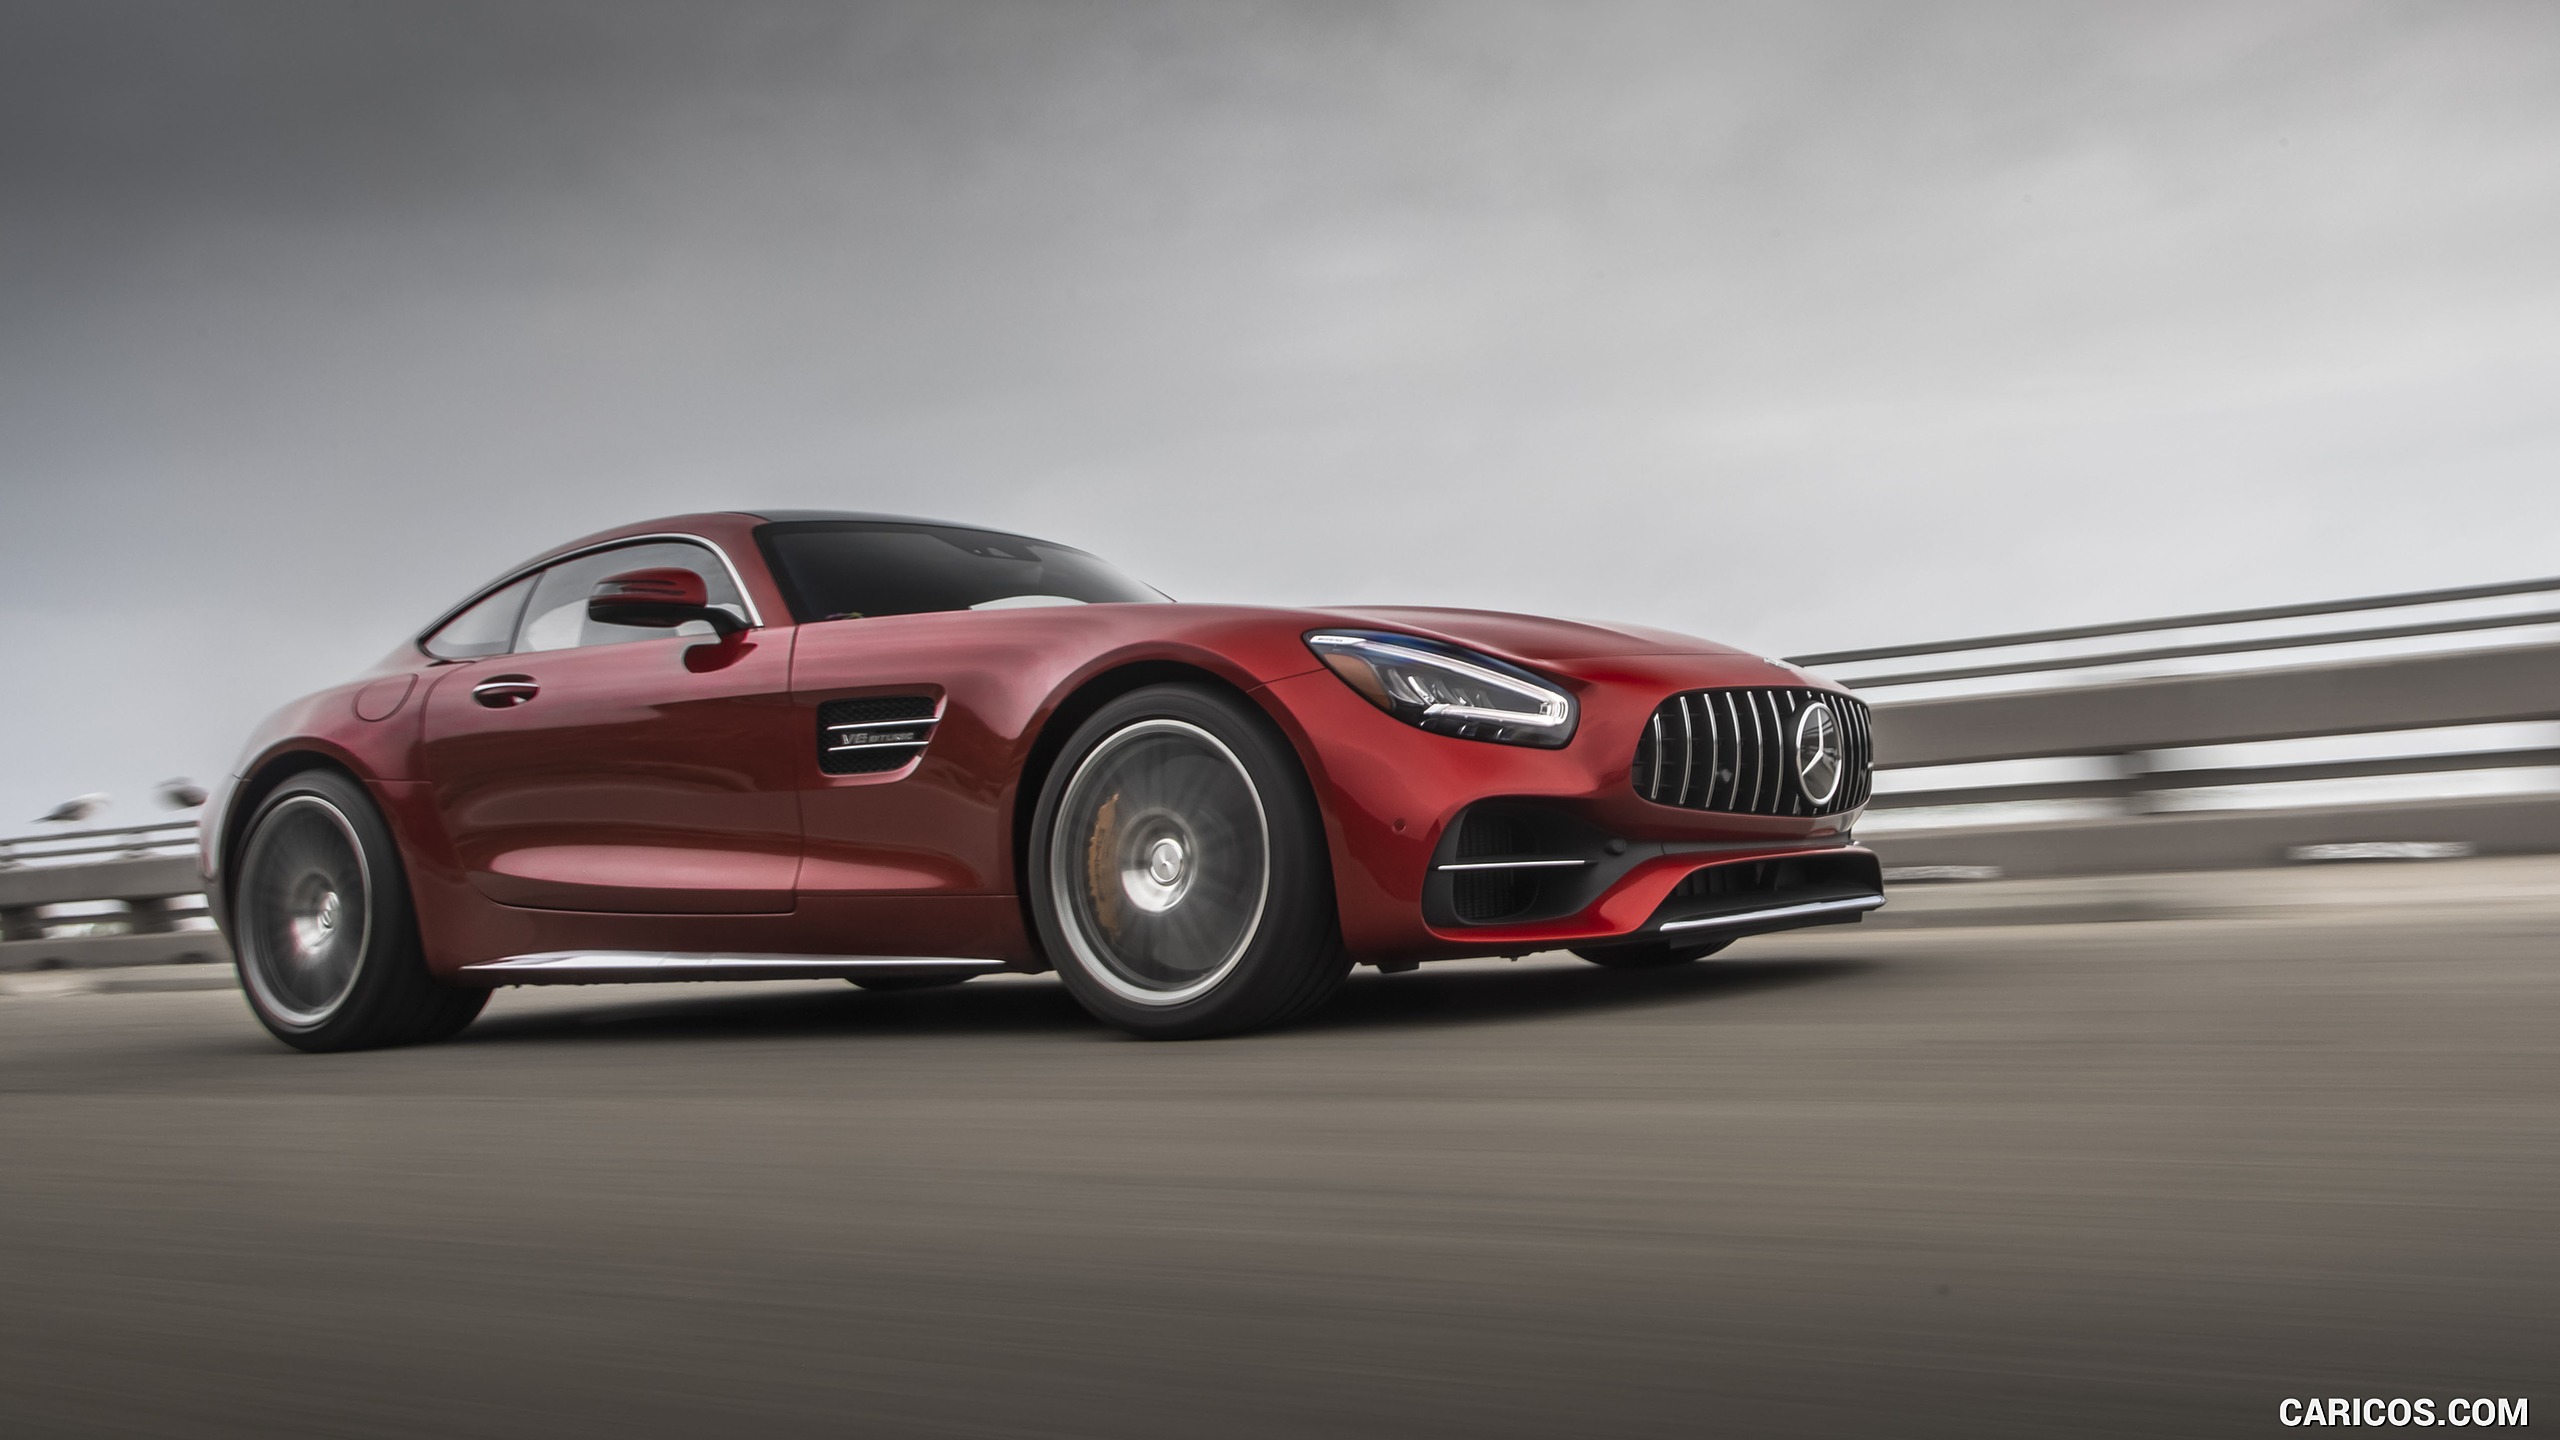 2020 Mercedes-AMG GT C Coupe (US-Spec) - Front Three-Quarter, #148 of 328